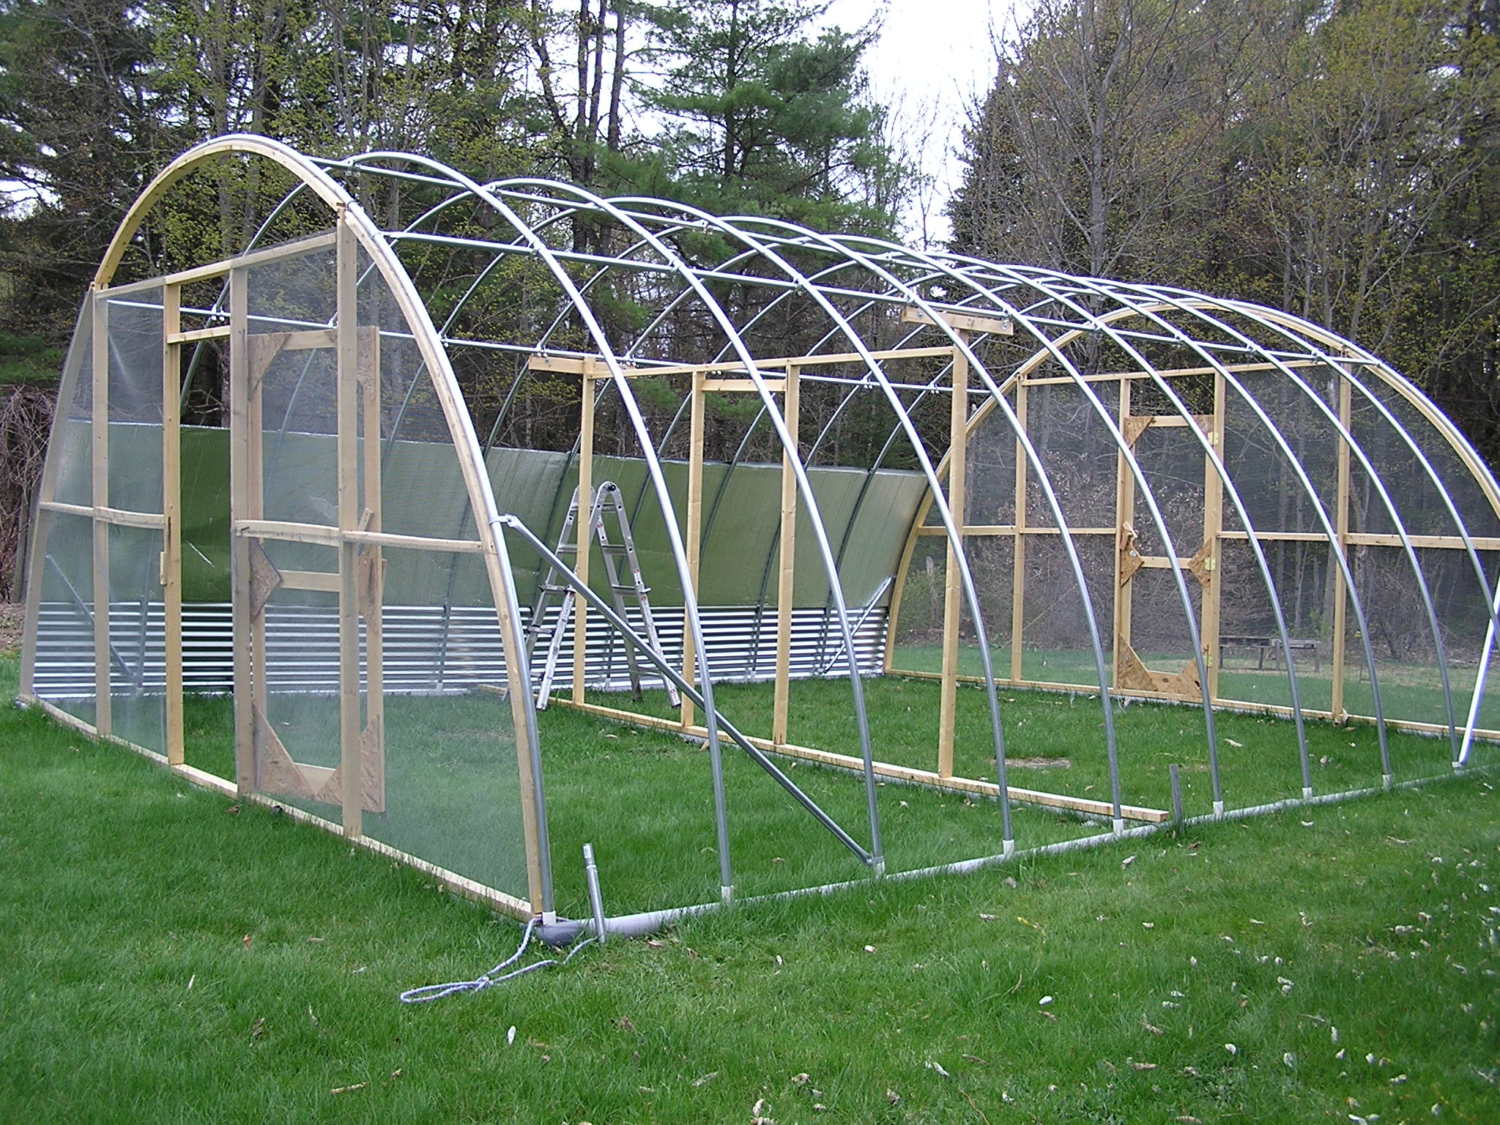  is our partially constructed hoop coop. It is going to be 2 rooms